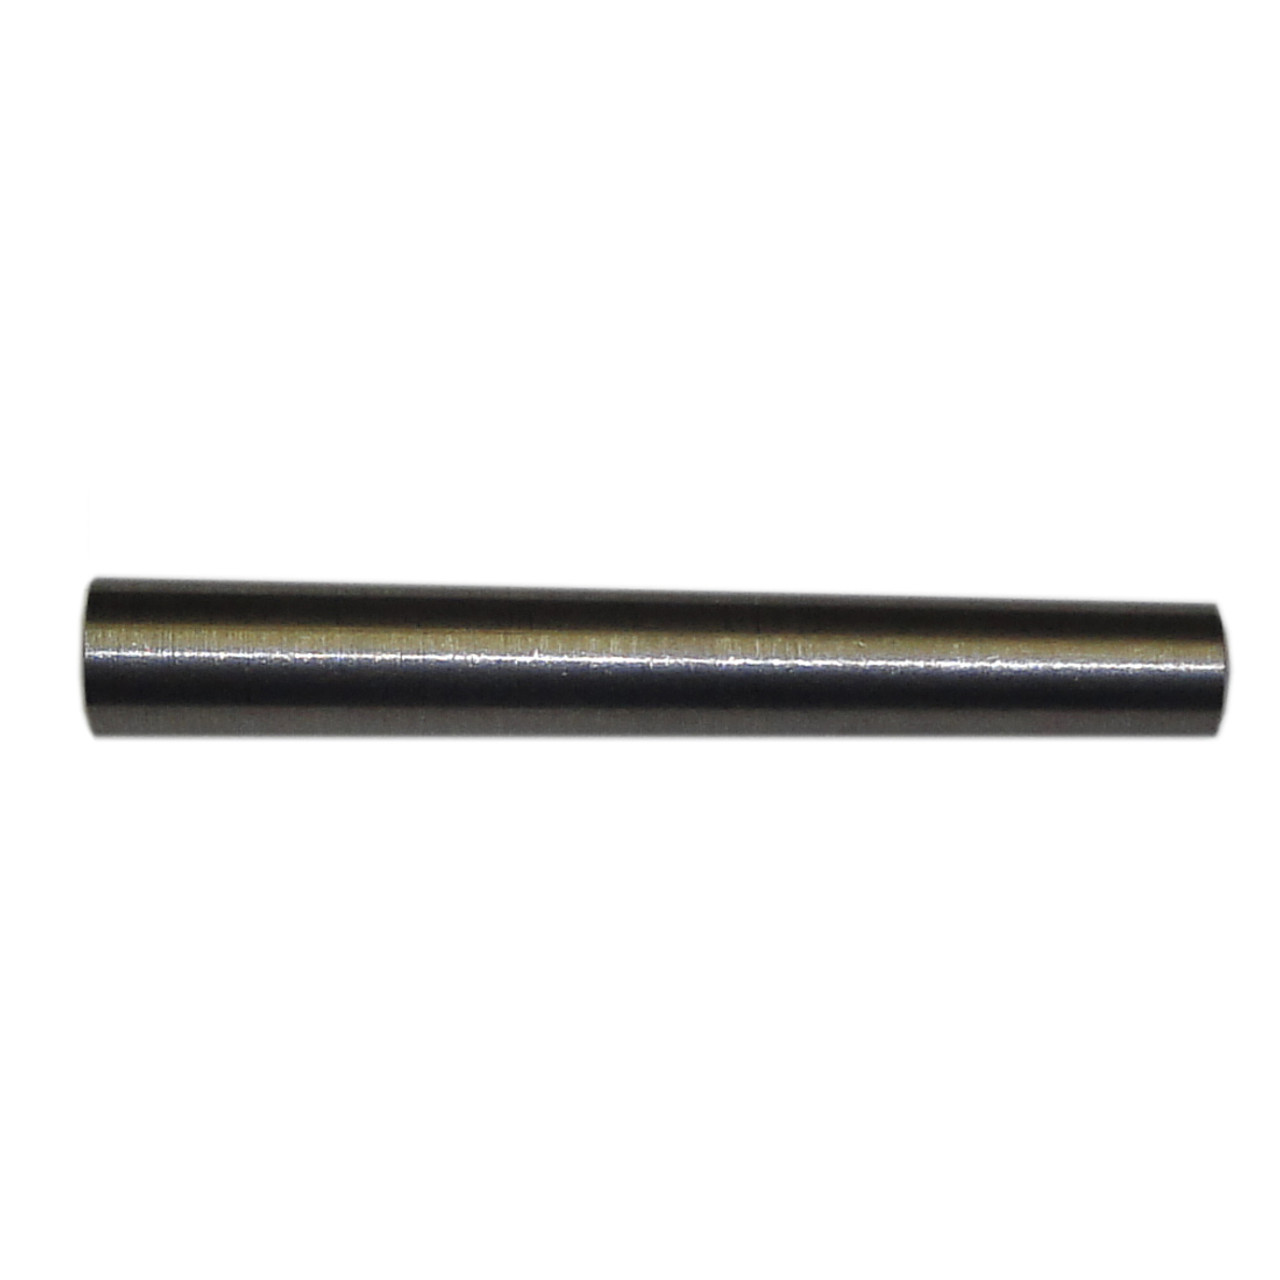 Kolstrand Stainless Steel Tapered Pin - #5 X 2 inch Long -  for Brass Gurdy